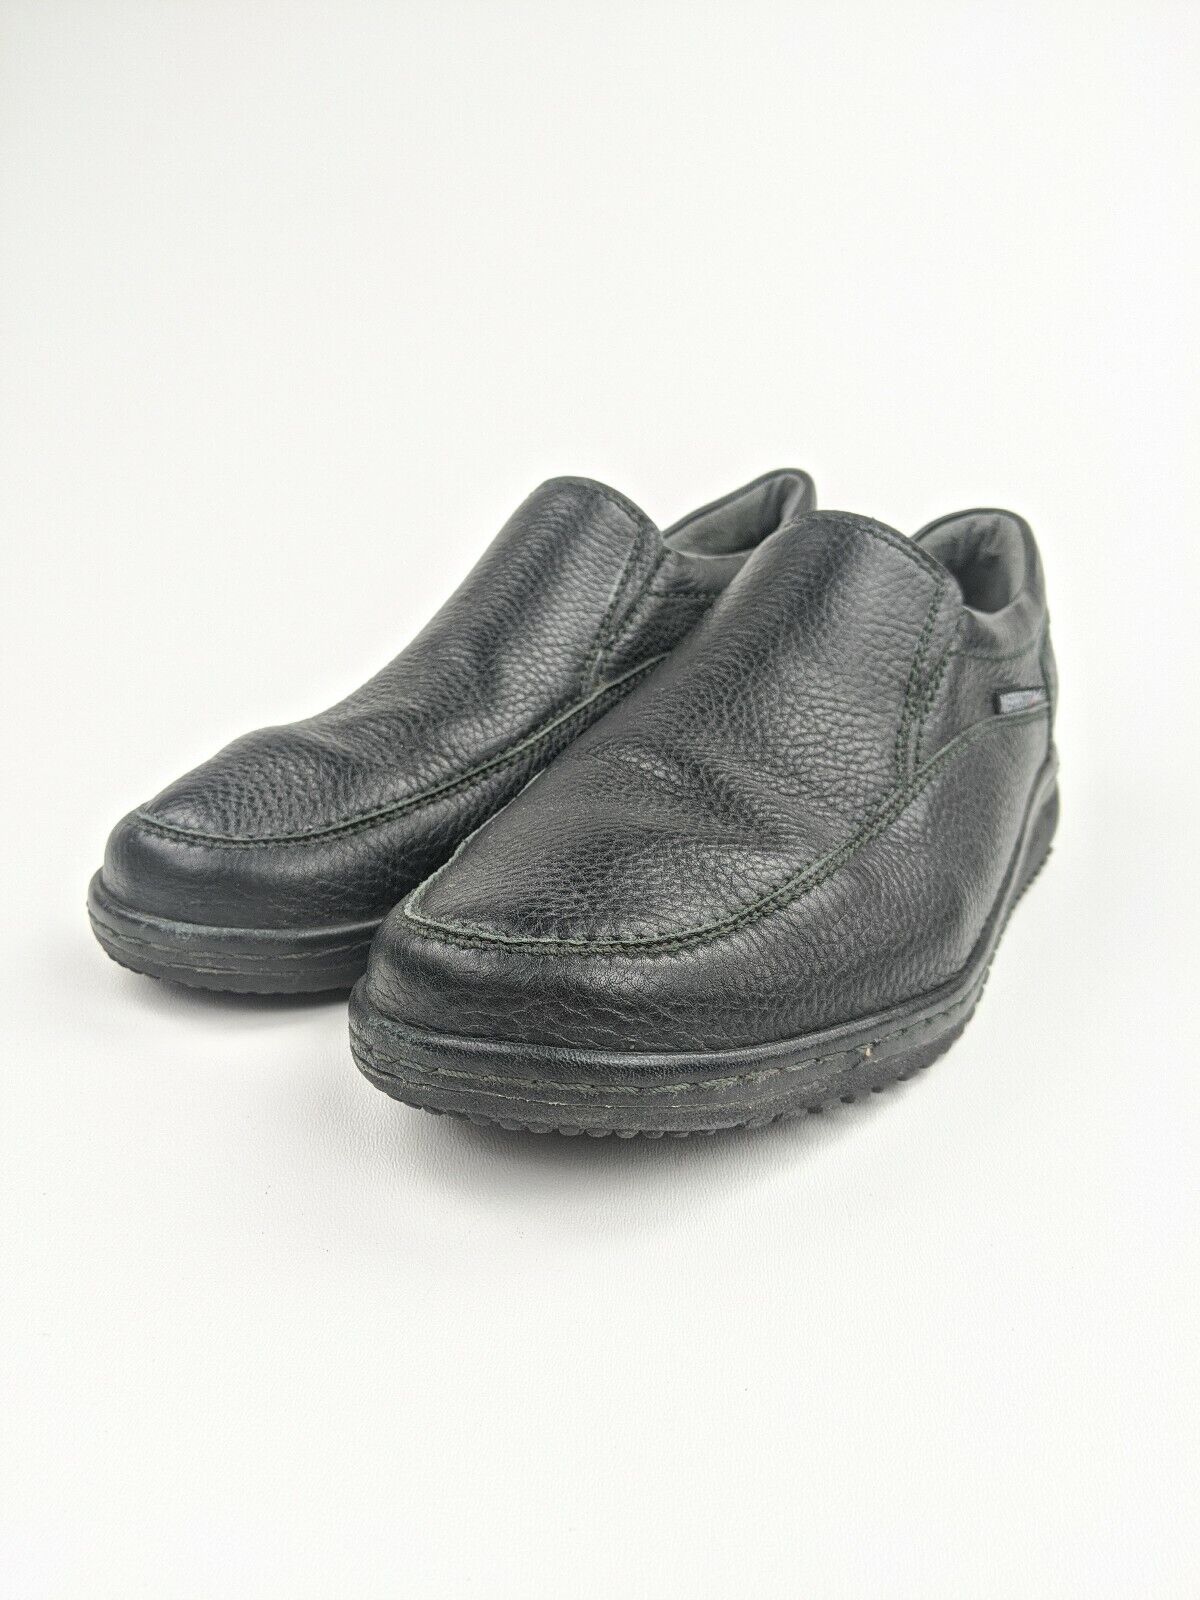 Classic Mephisto Travelapos;s Black Leather Direct stock discount Air Men Oxfords Jet Casual